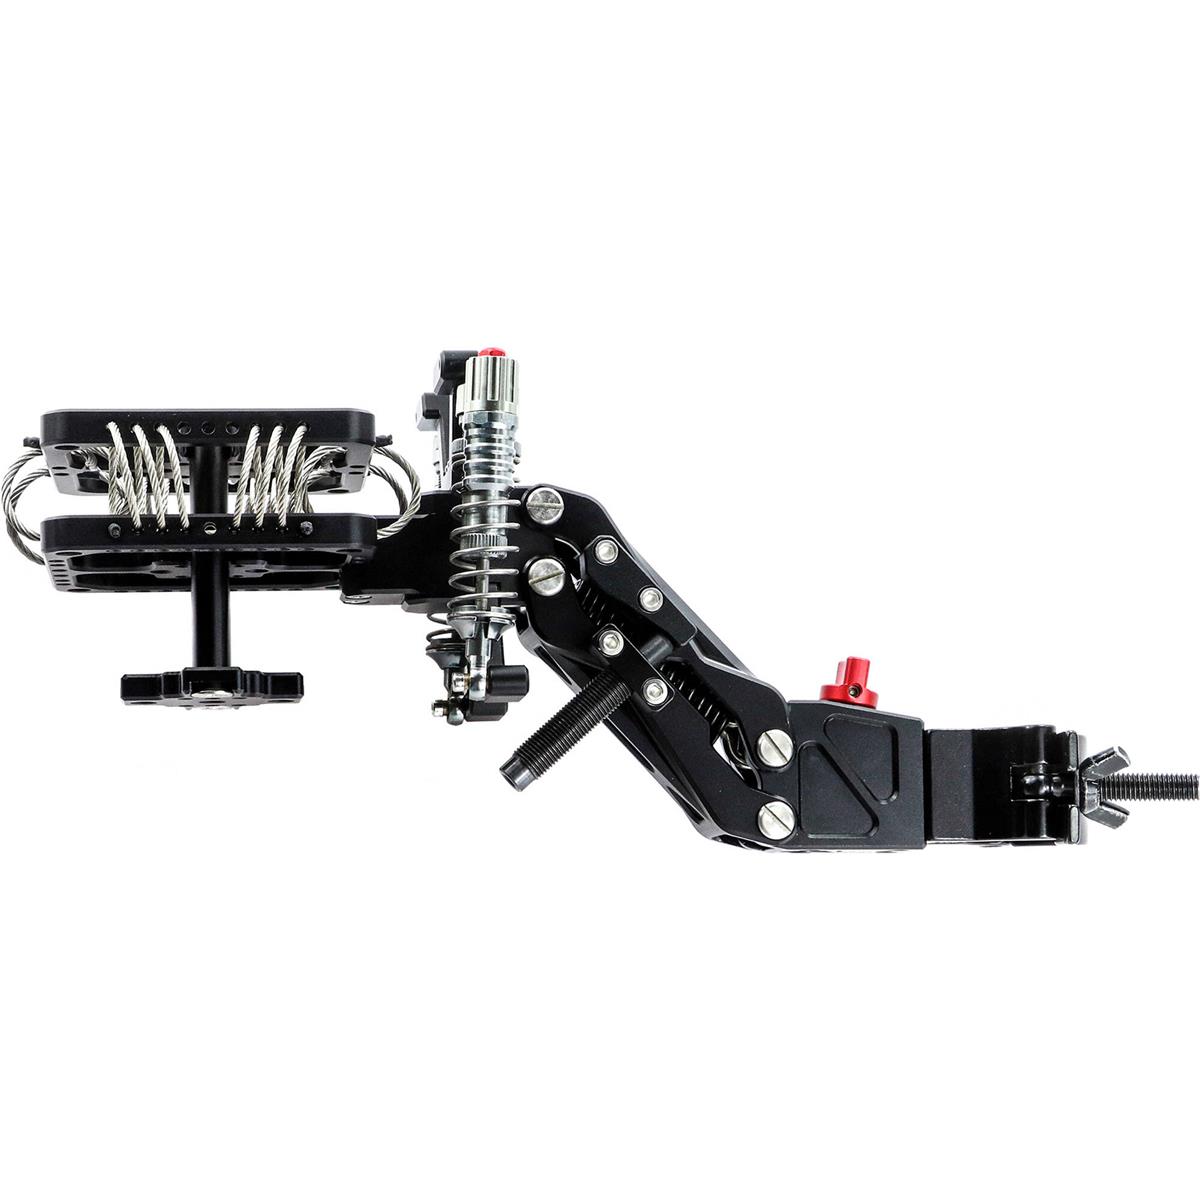 

Came-TV Camera Video Stabilizer Single Arm, Inverted, 1.5-12 lbs Payload